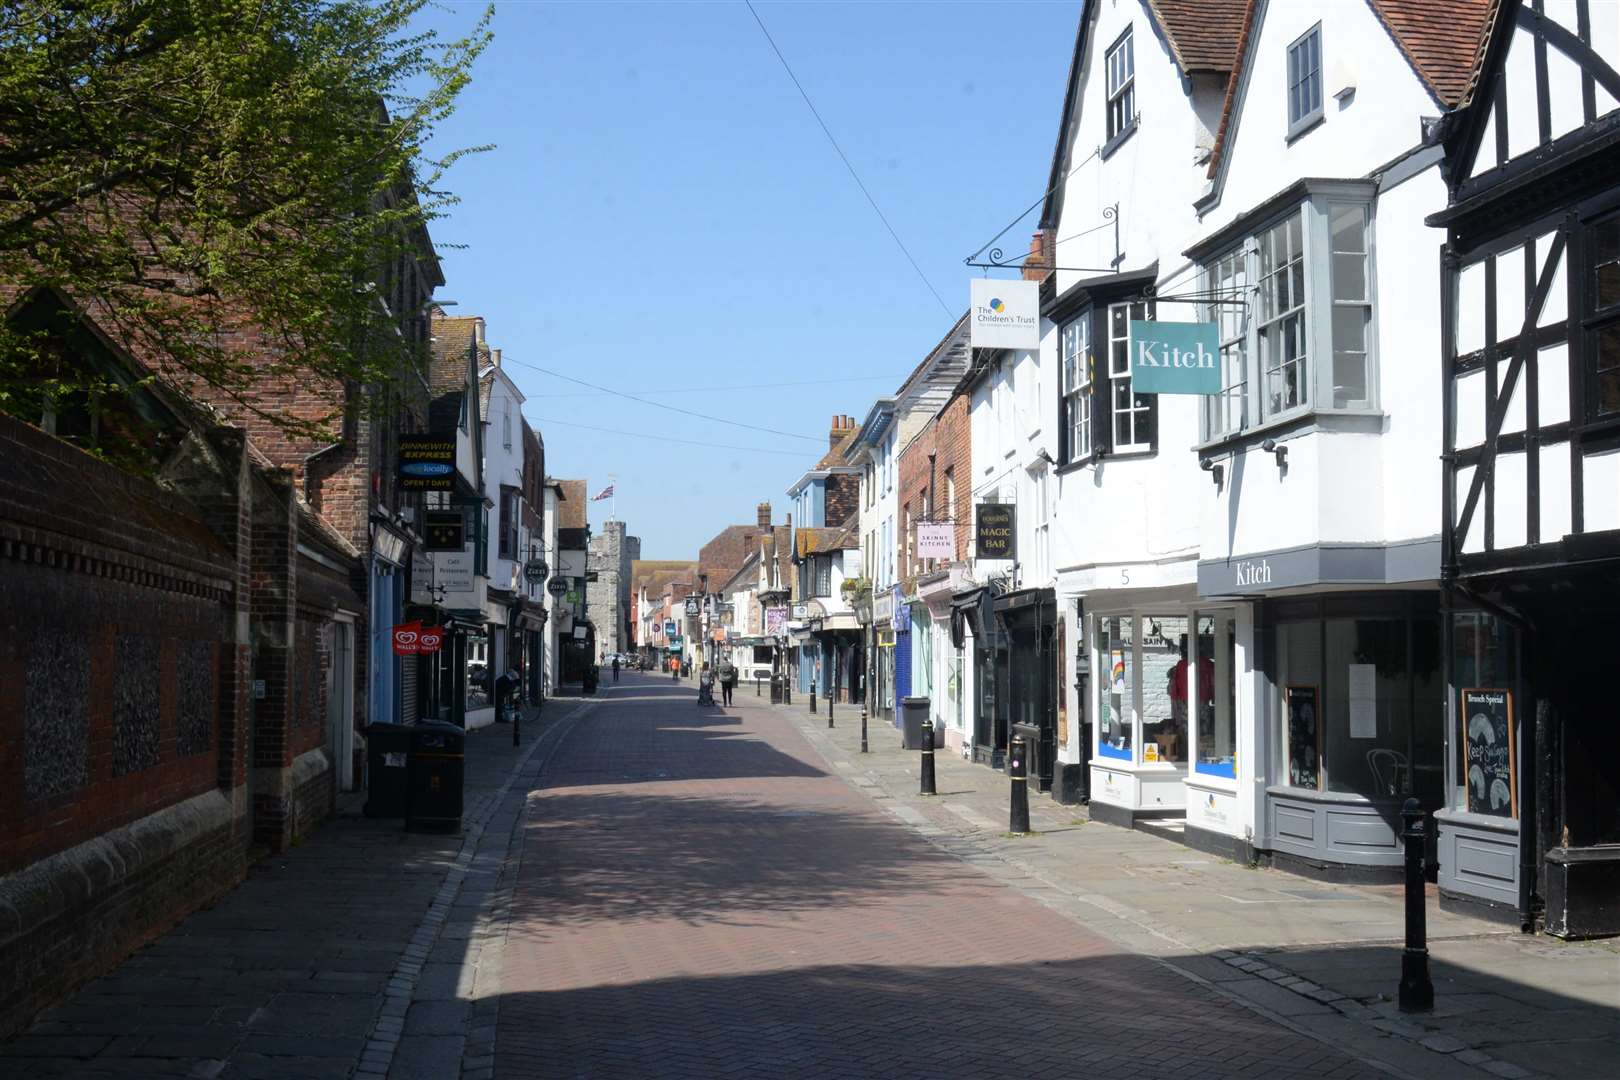 Like everywhere else, Canterbury's non-essential businesses are locked up